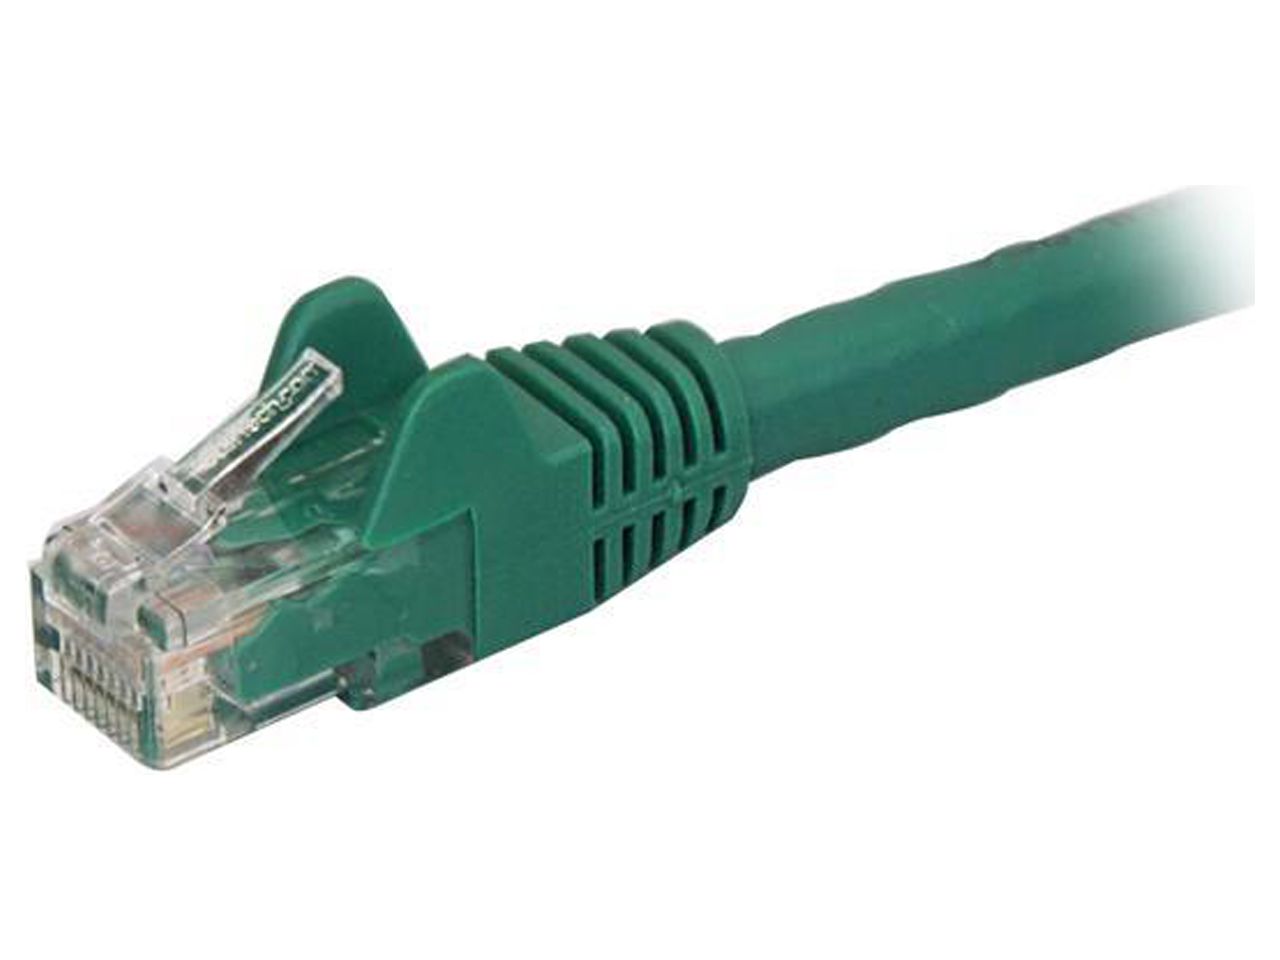 StarTech.com N6PATCH150GN 150 ft. Cat 6 Green Cat 6 Cables - image 2 of 2